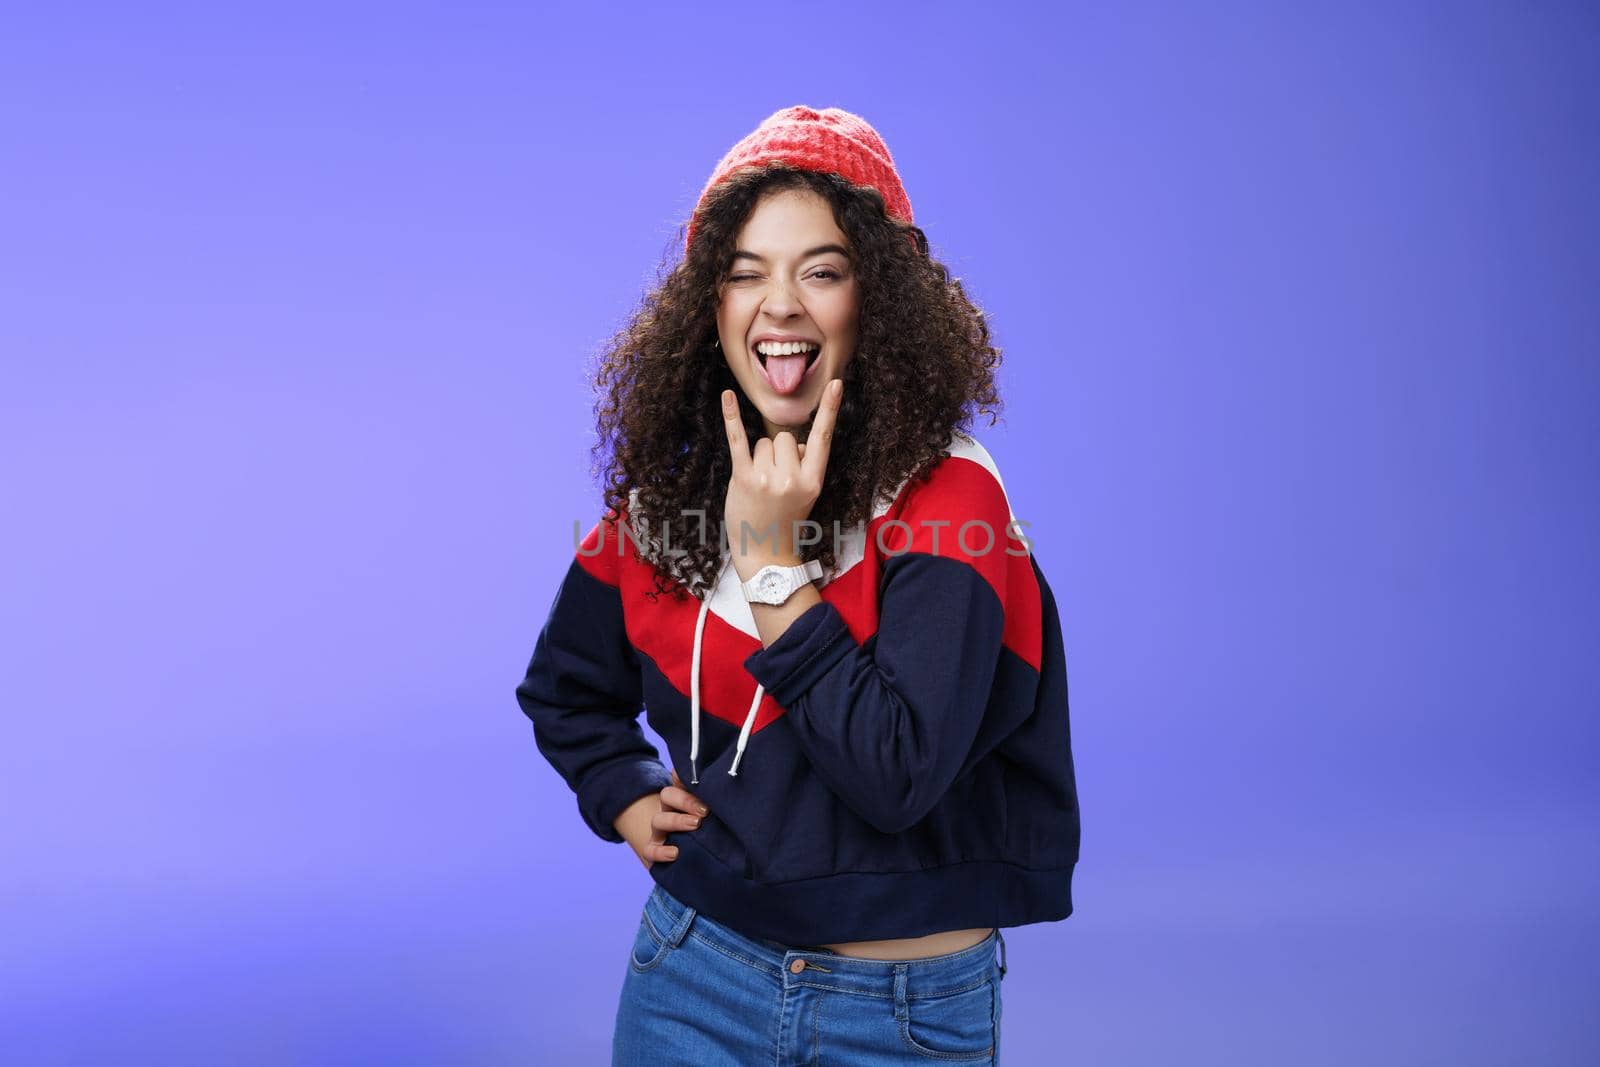 Stylish and cool energized swag girl with curly hairstyle in warm beanie showing rock-n-roll gesture near mouth and sticking out tongue smiling having fun, partying and enjoying life over blue wall.